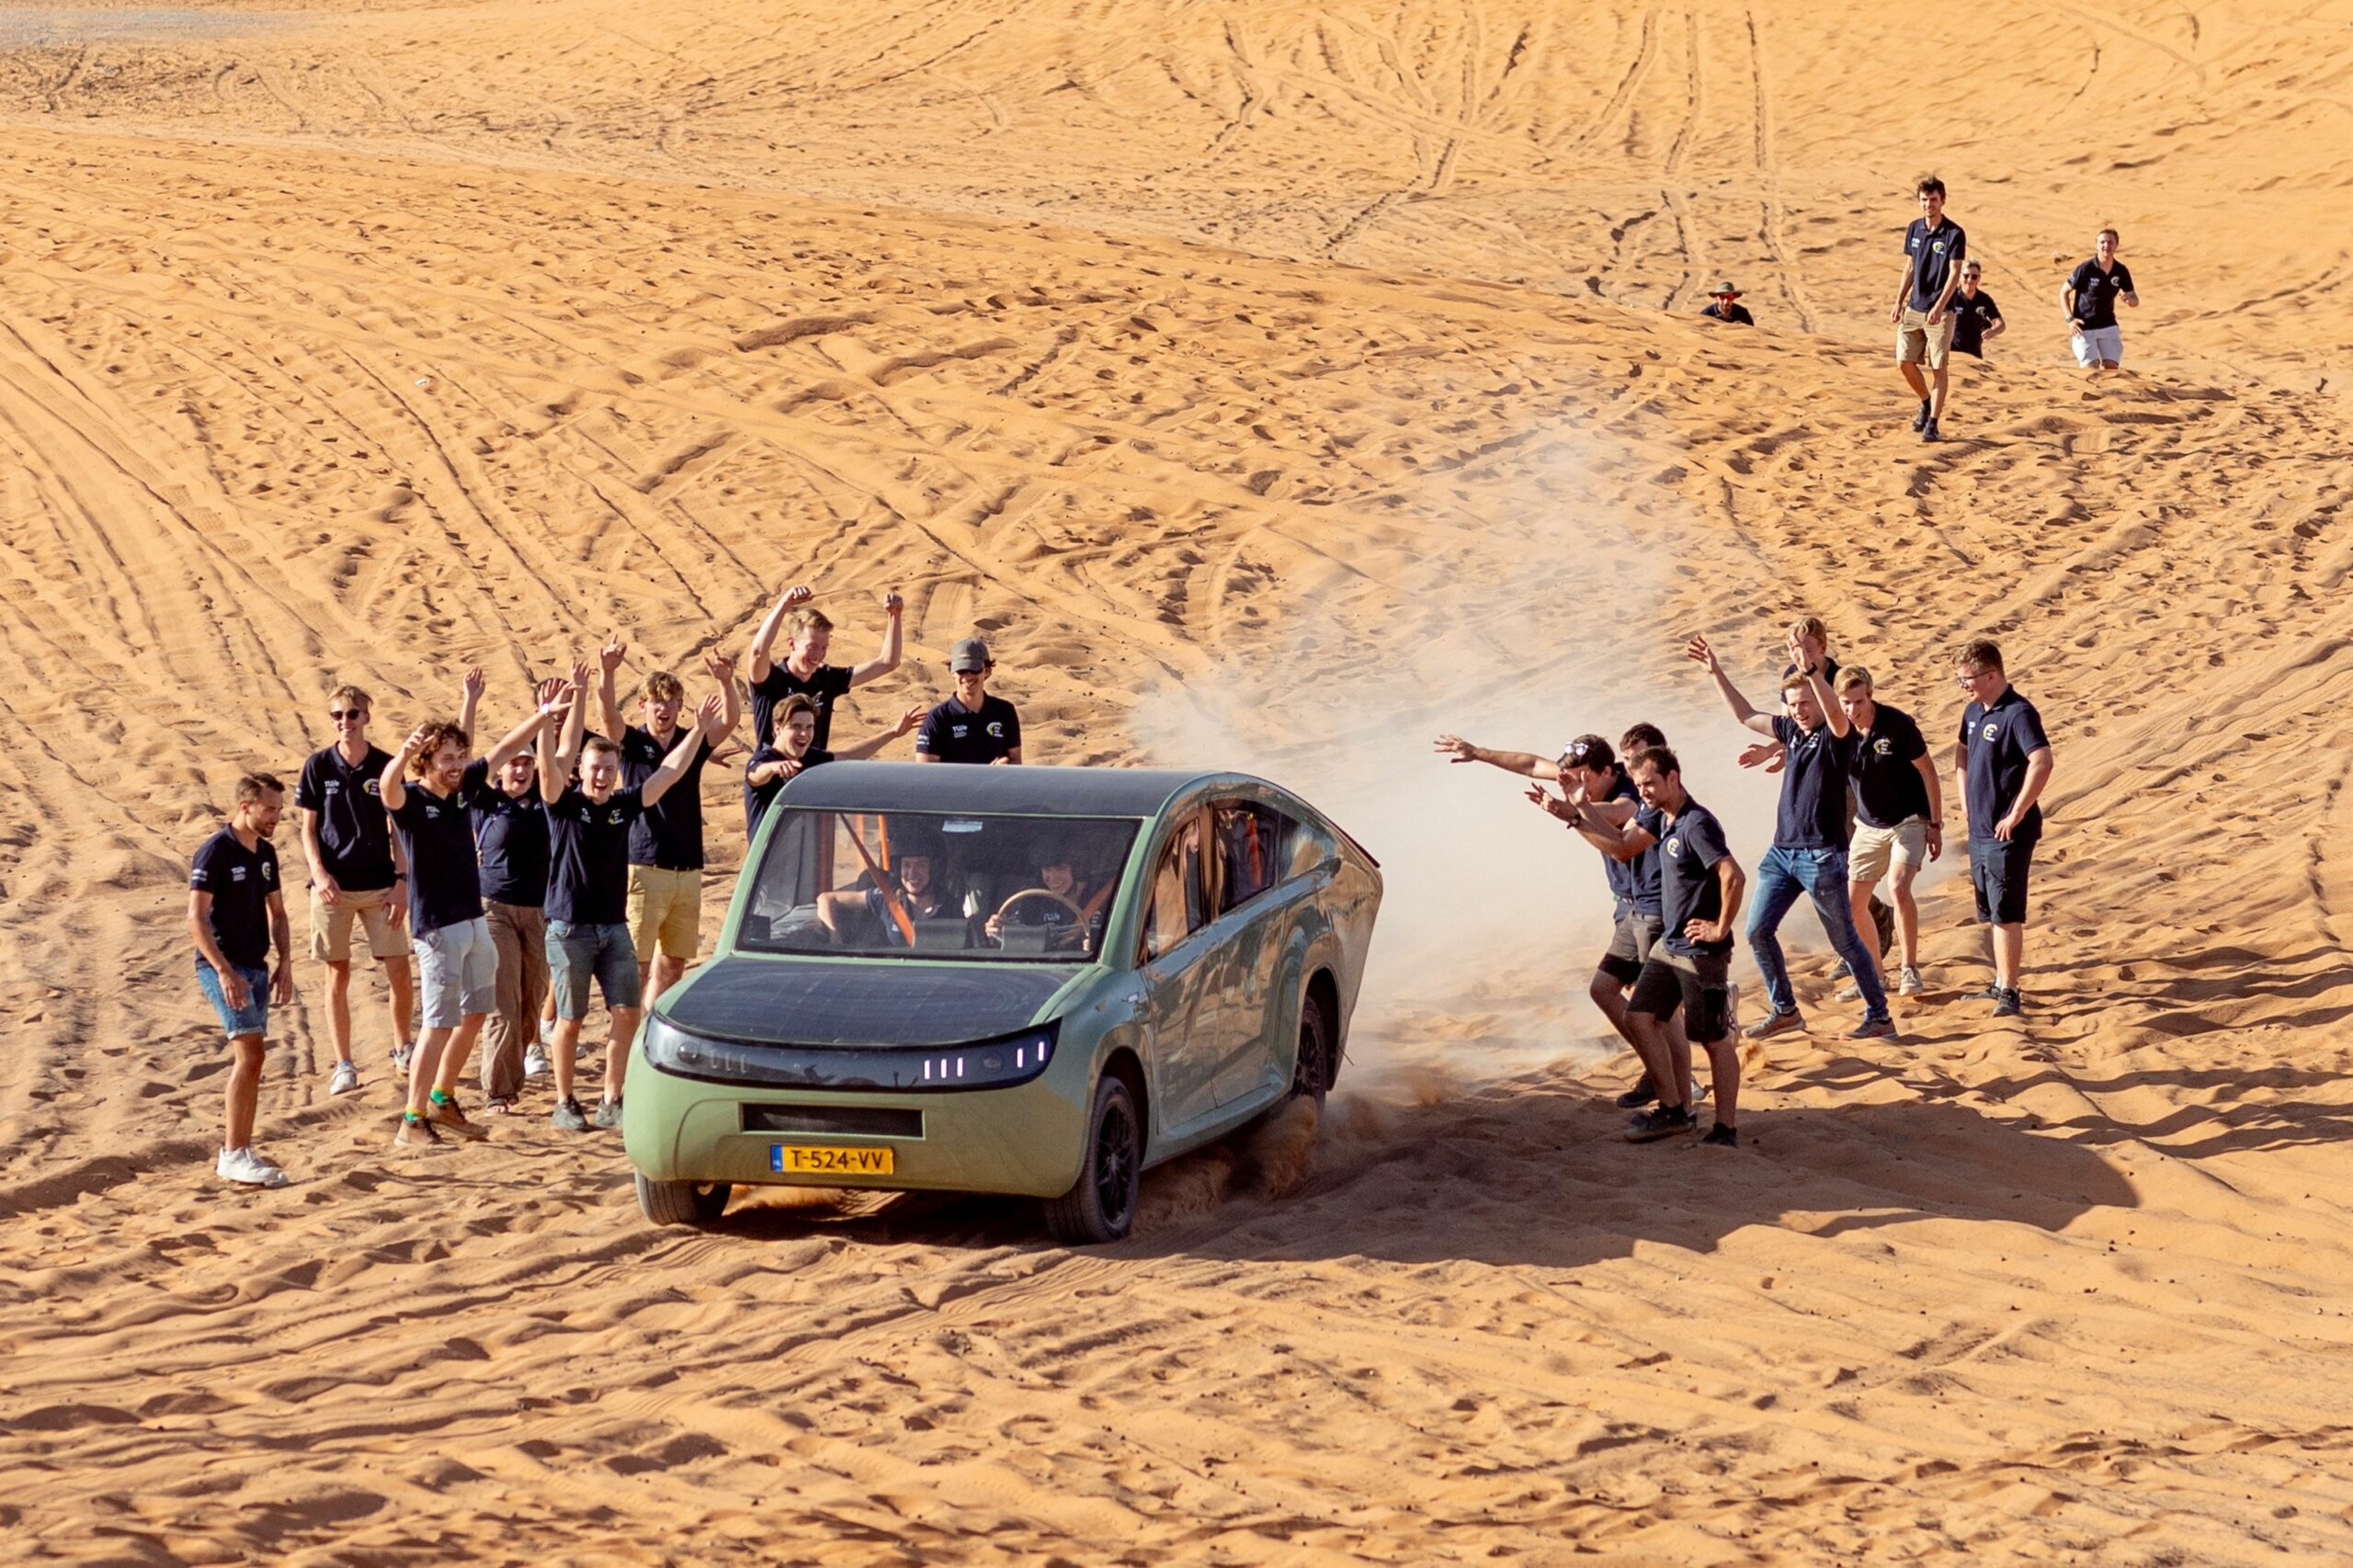 The world’s 1st off-road solar-powered car tested in Morocco